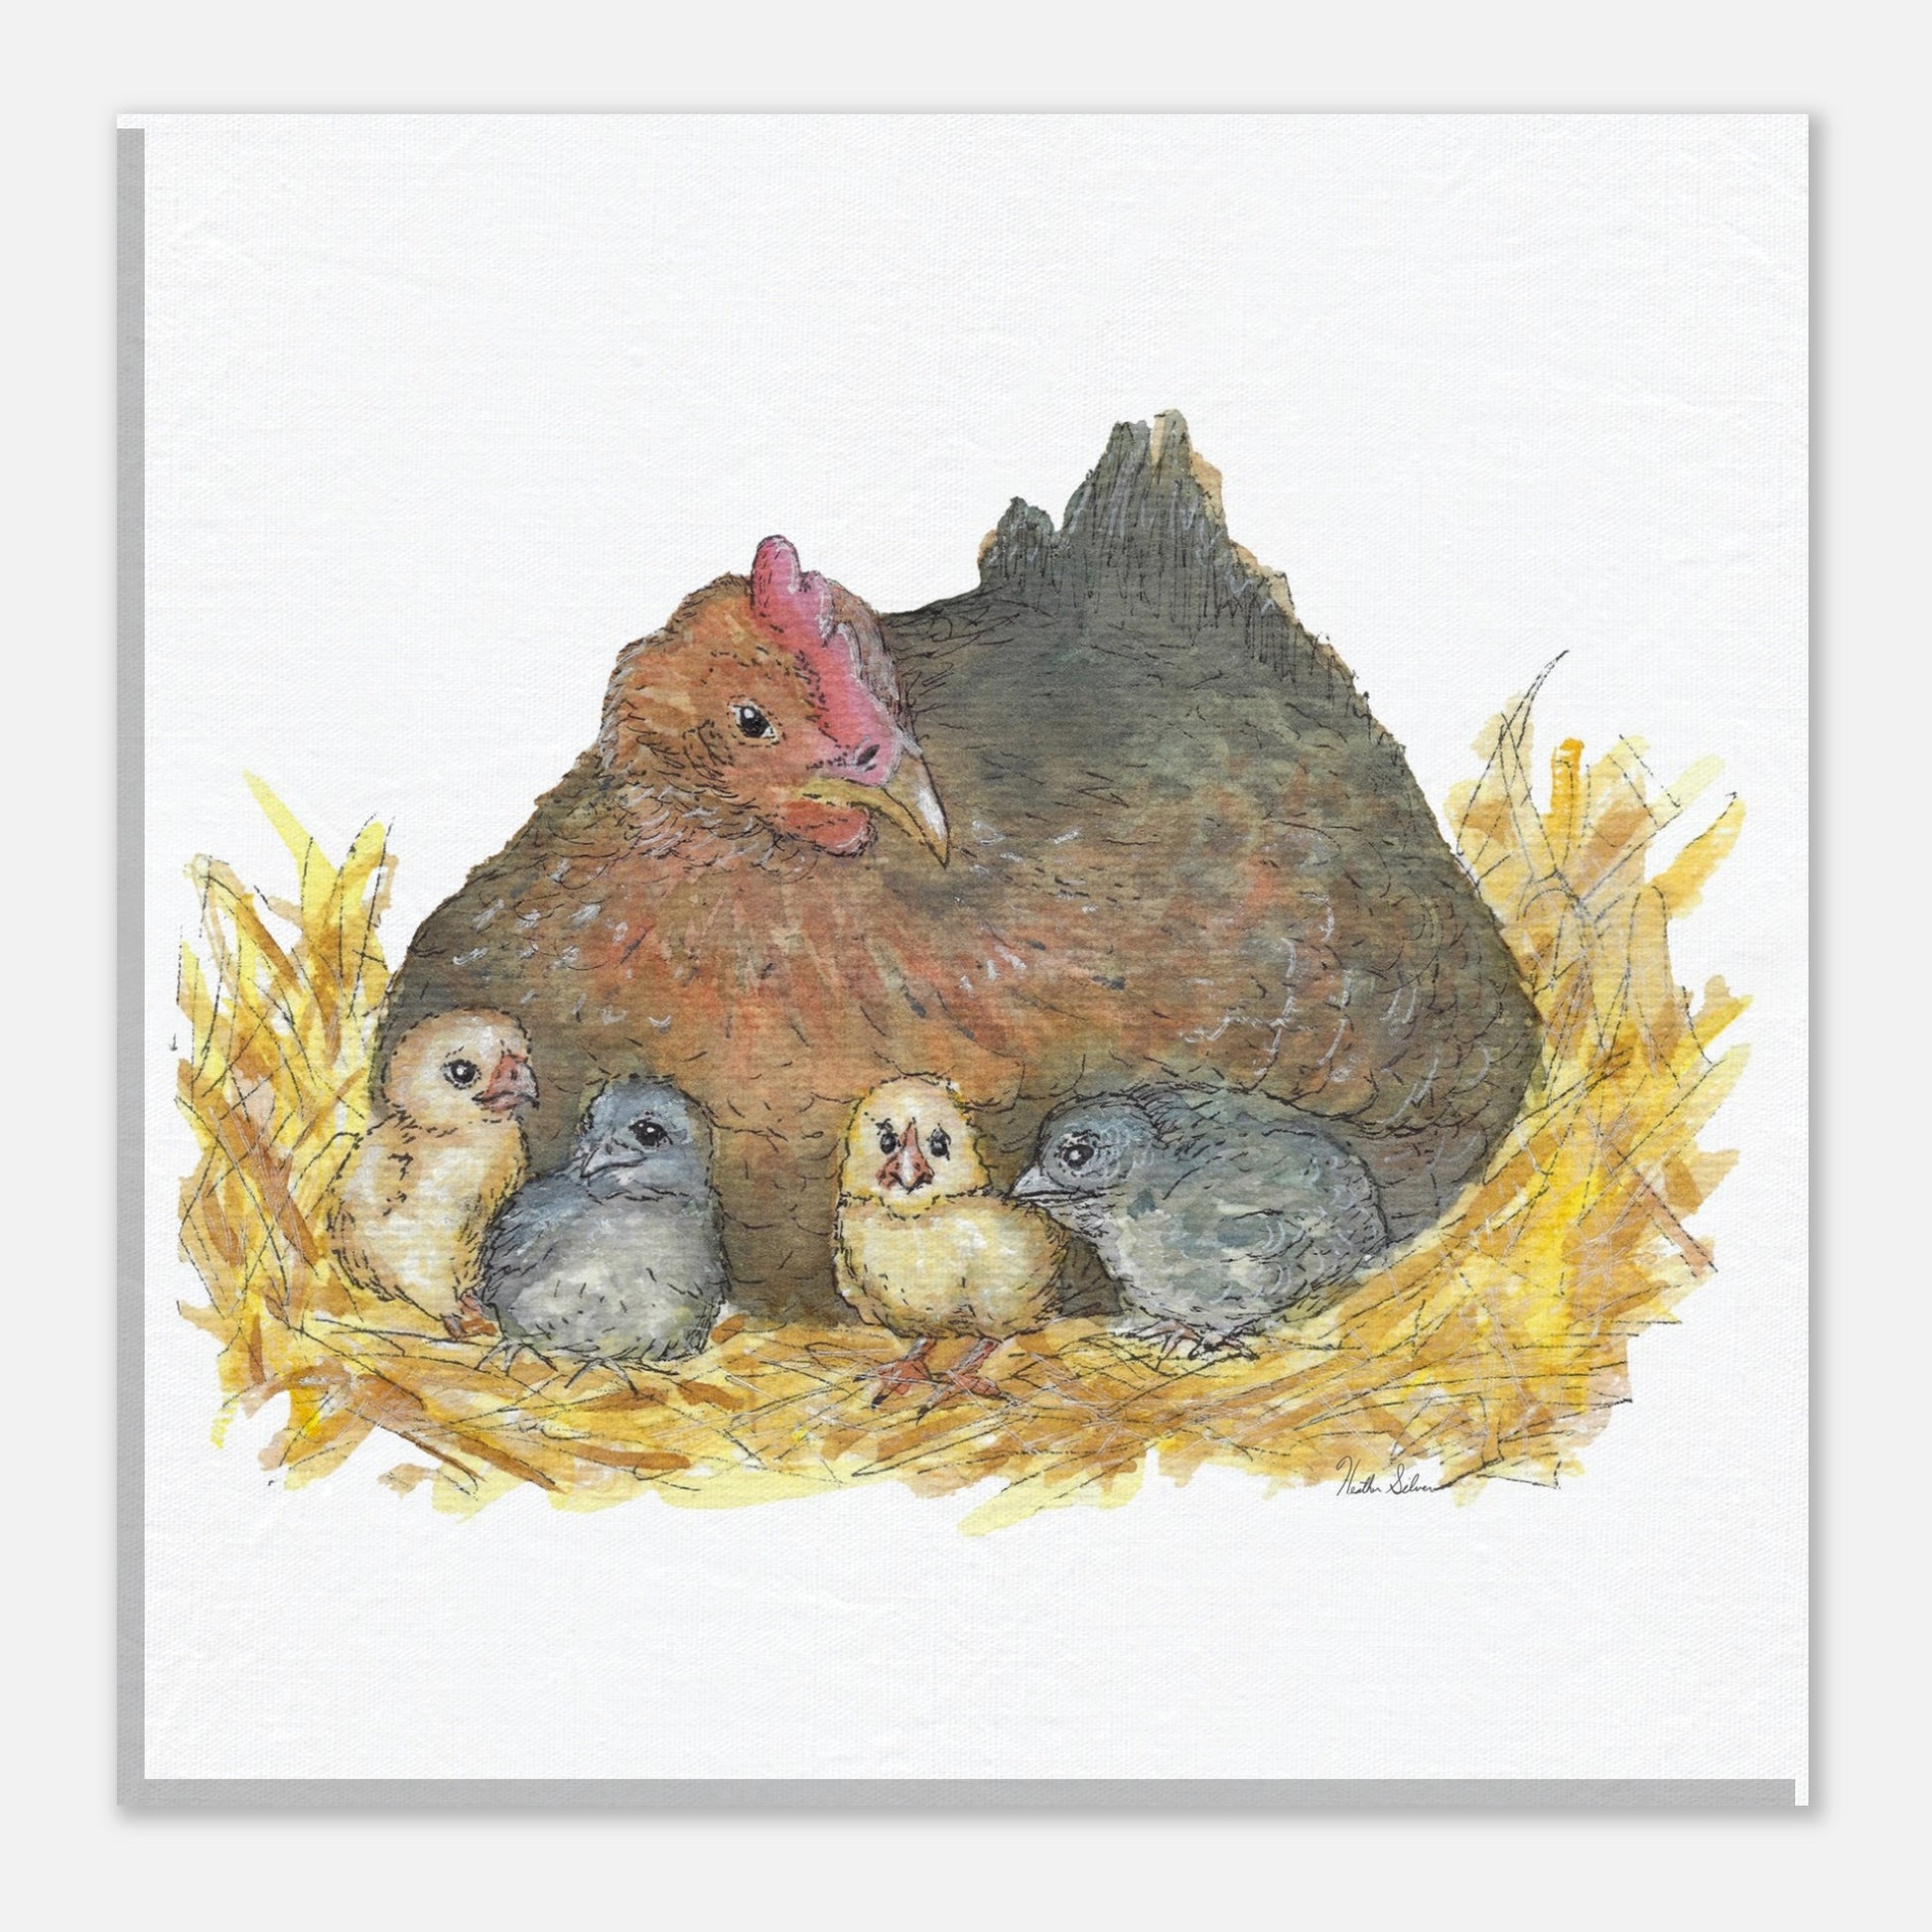 12 by 12 inch slim canvas Mother Hen print. Features a watercolor mother hen and her four chicks in a nest.